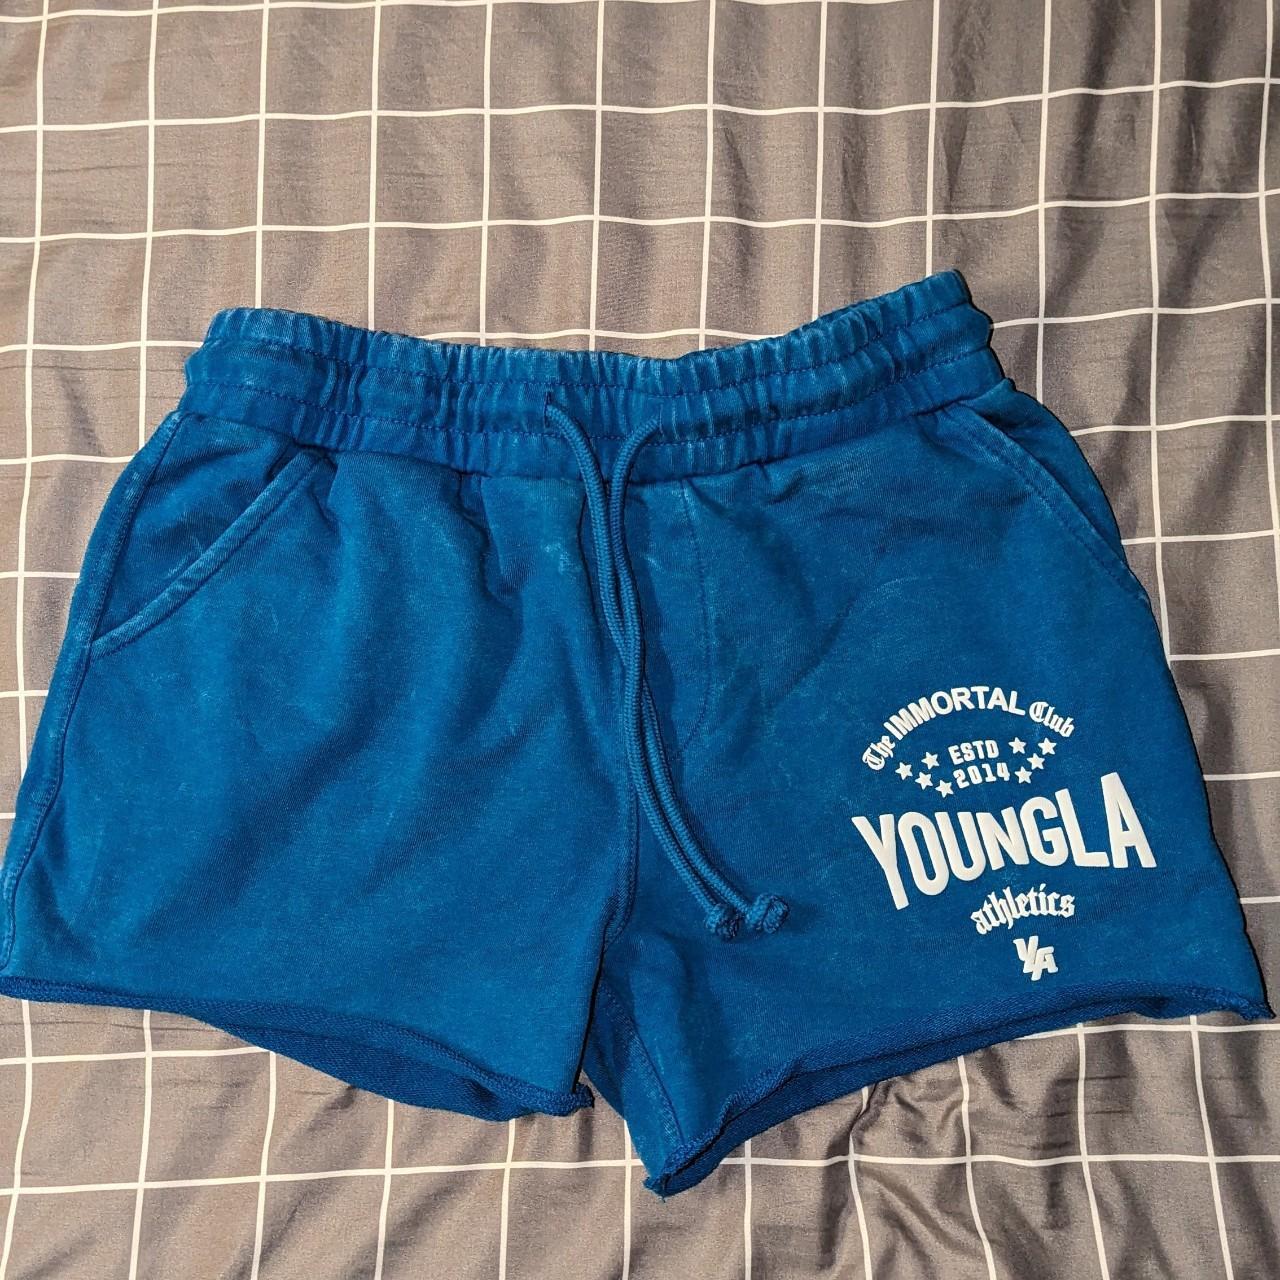 Youngla 554 Cloud Hoodie Small, it is a little to - Depop